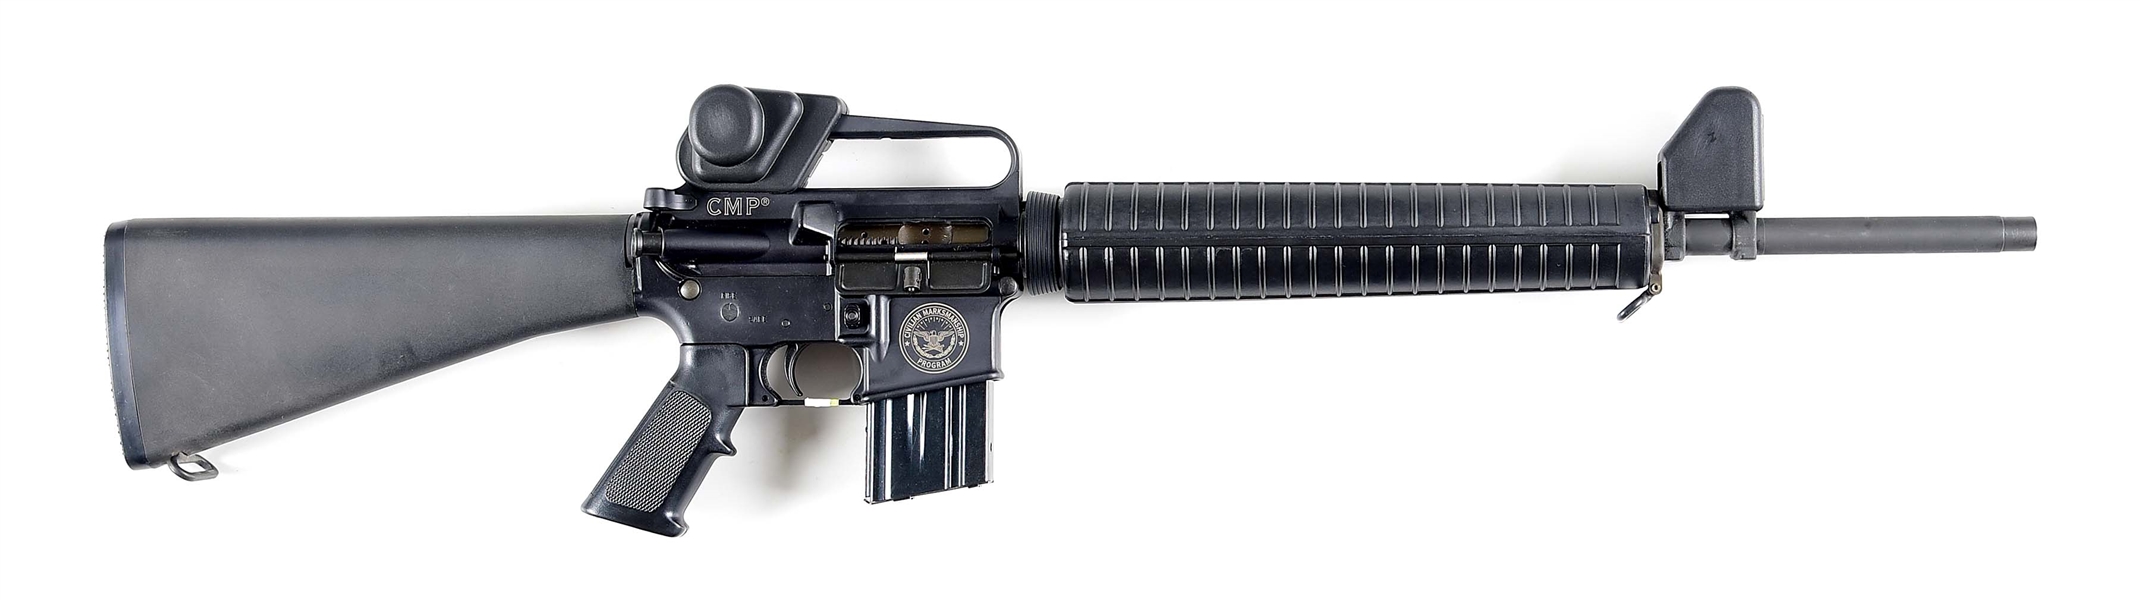 (M) BUSHMASTER XM15-E2S CMP HEAVY BARREL TARGET SEMI-AUTOMATIC RIFLE WITH CAMP PERRY INSPECTION TAG.